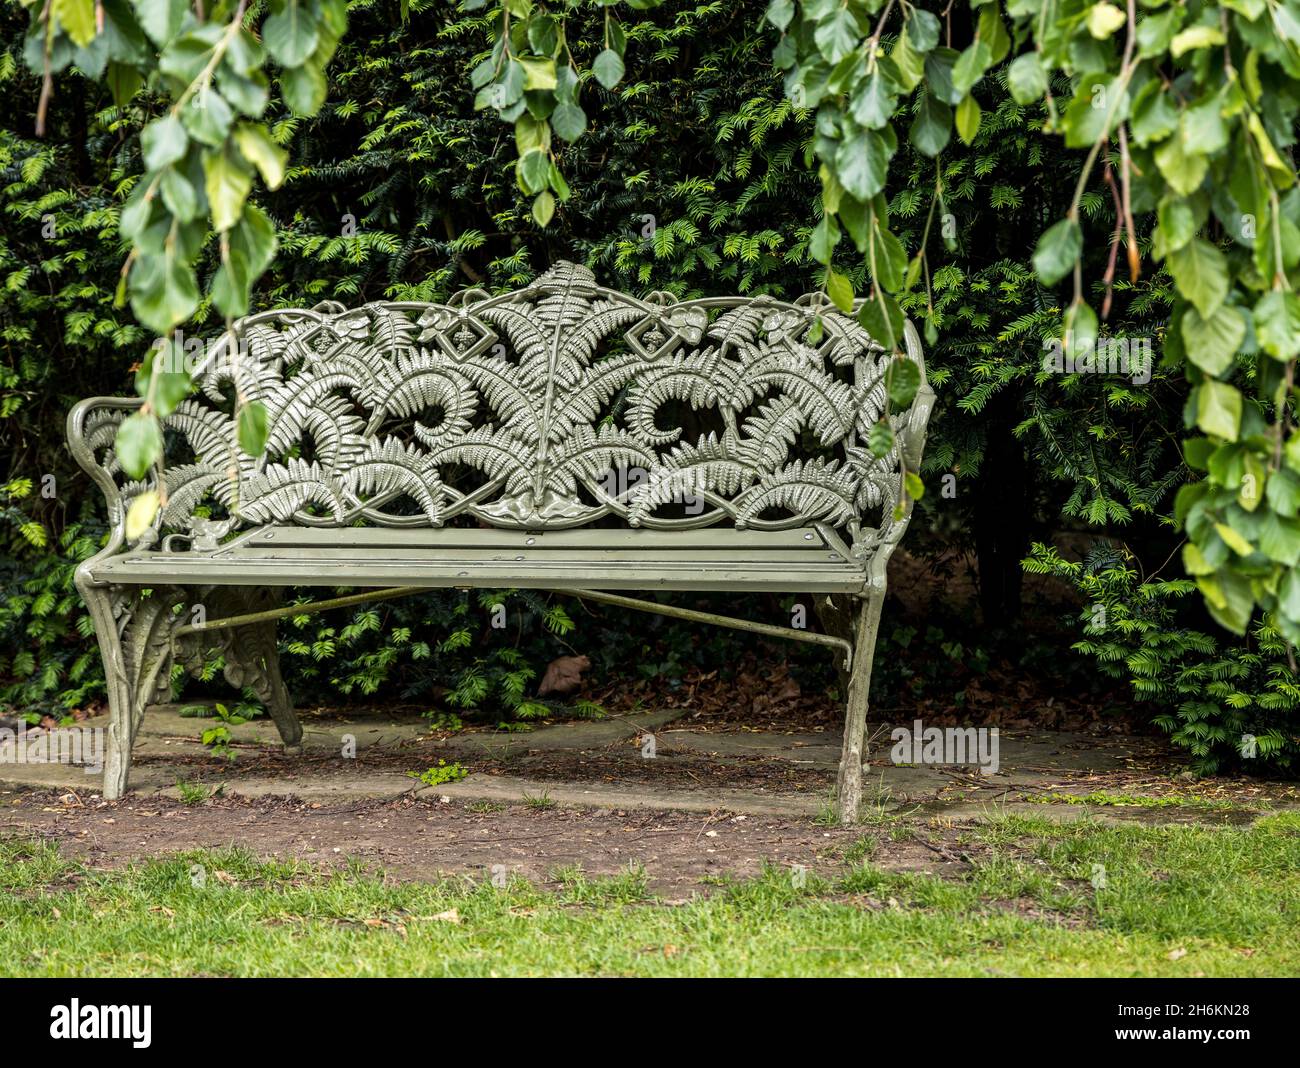 Posh park bench decorated with fern palms in pretty garden setting England Stock Photo